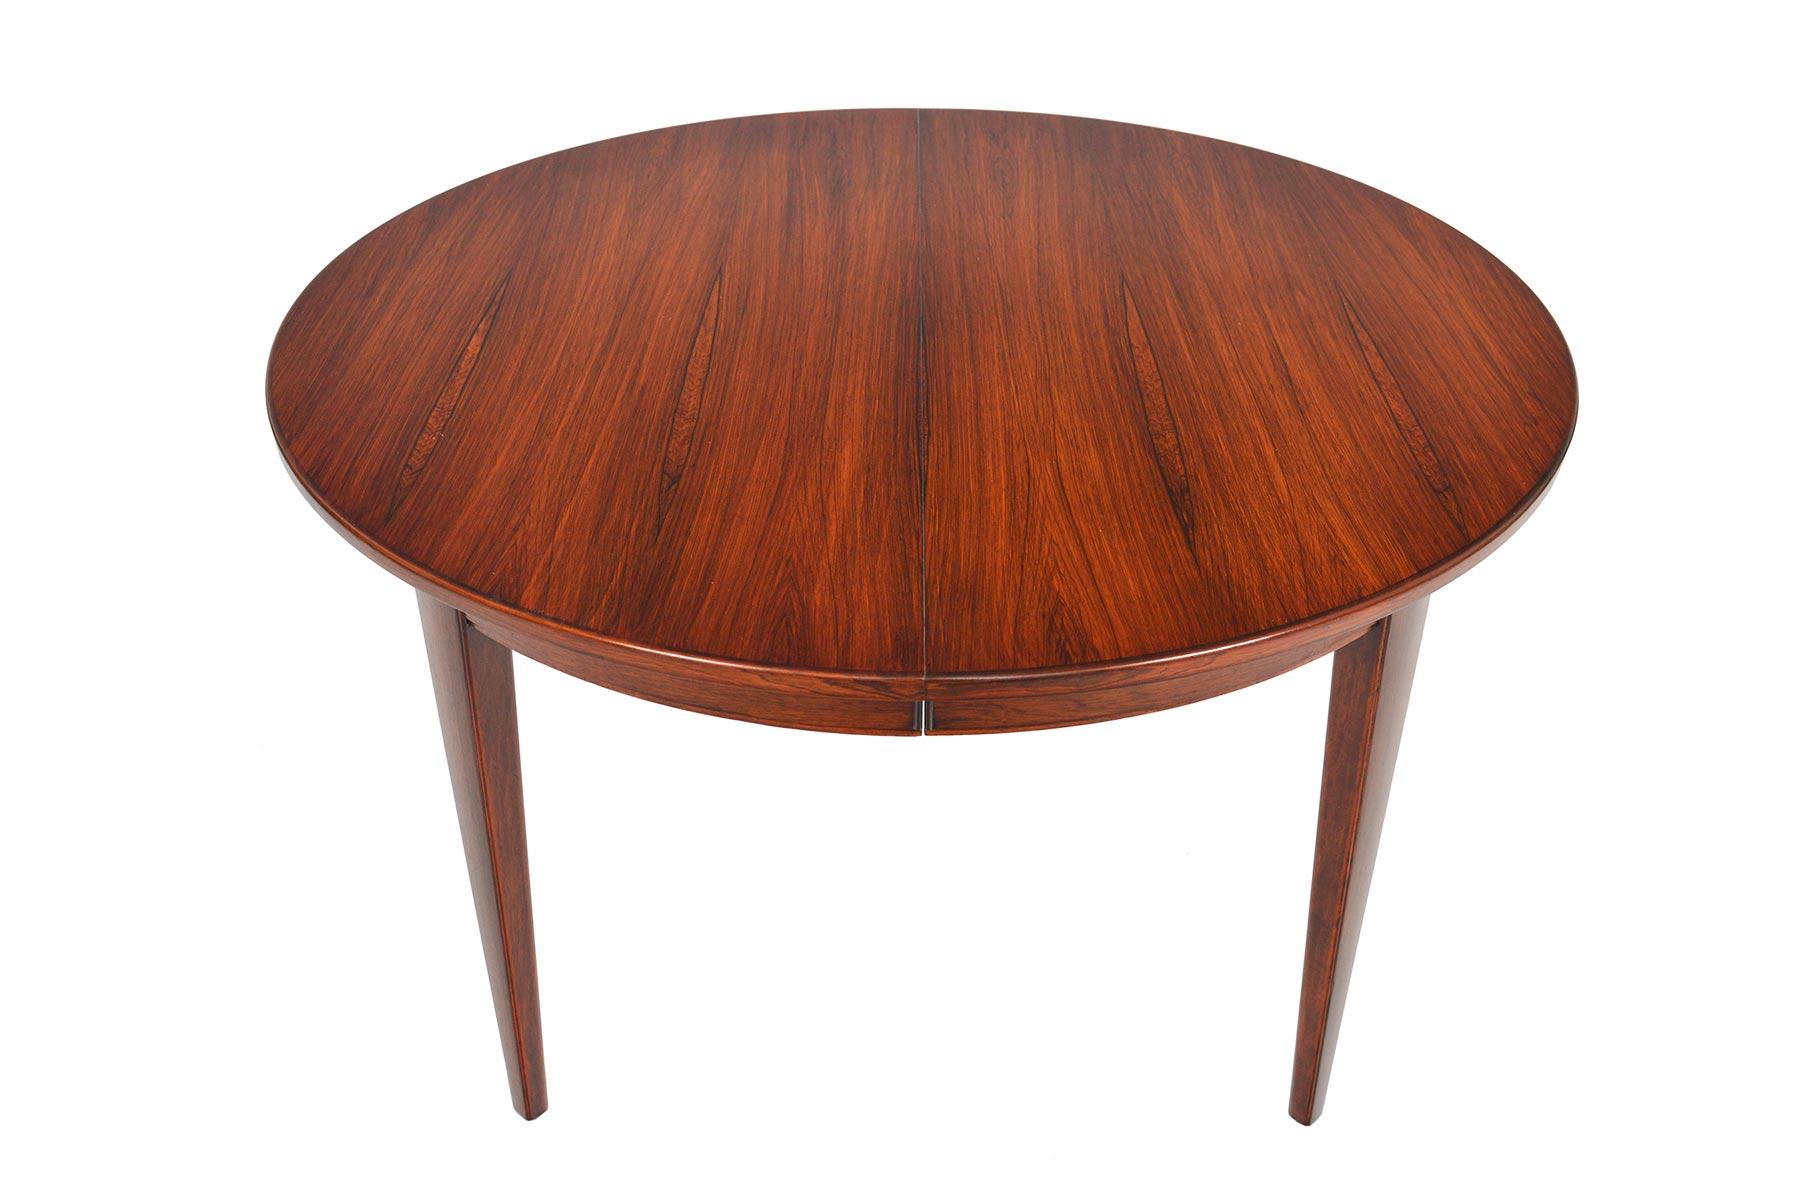 This beautifully simple round dining table was manufactured in Denmark in the 1960s. Book- matched Brazilian rosewood wood grain is banded with a clean and simple line. Table extends to hold an additional leaf and can comfortably seat four to six